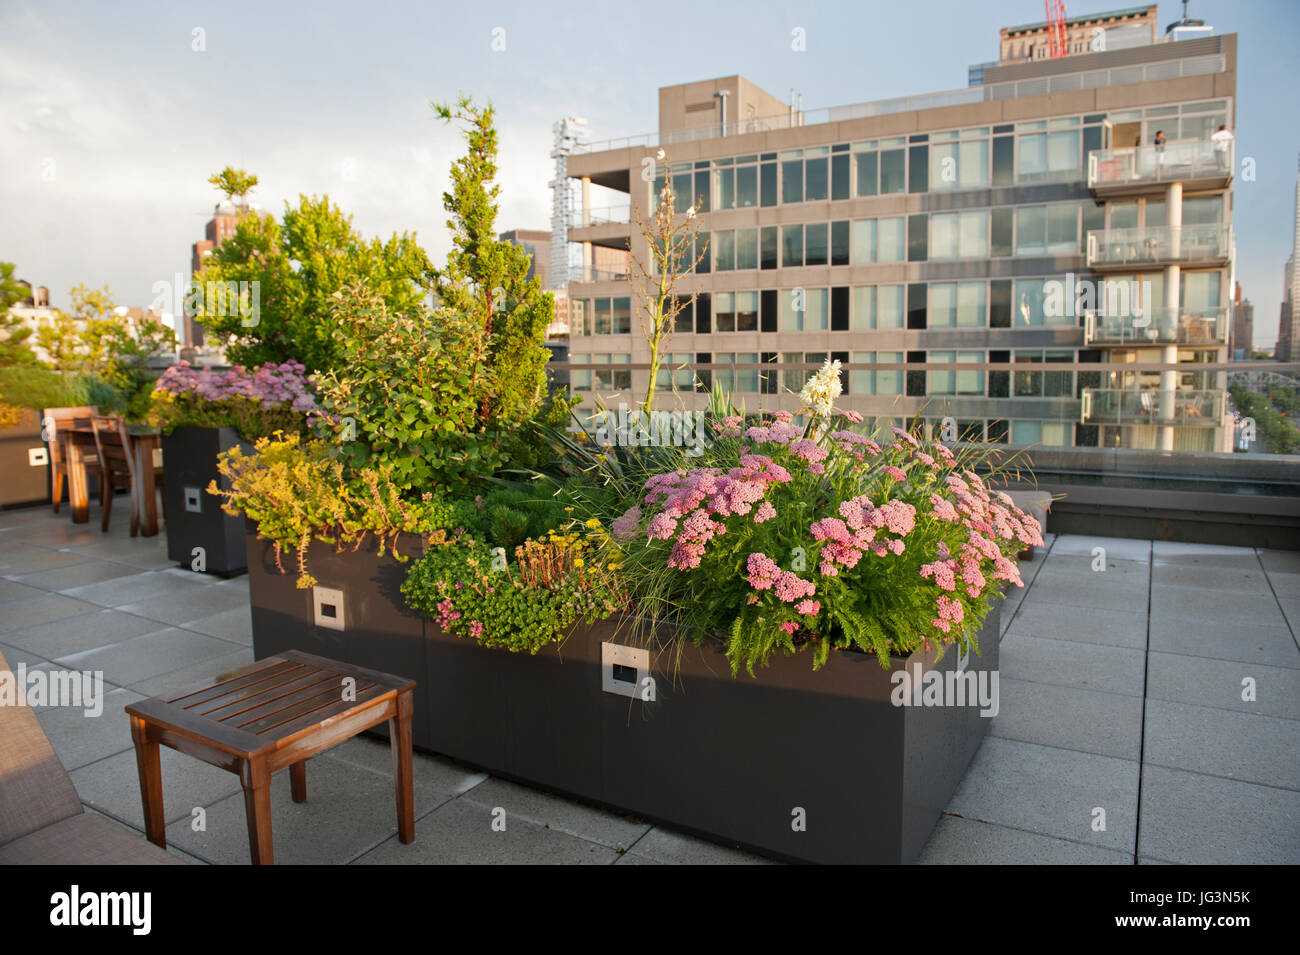 Many of the apartment buildings in Tribeca have rooftop gardens. July 1, 2017 Stock Photo